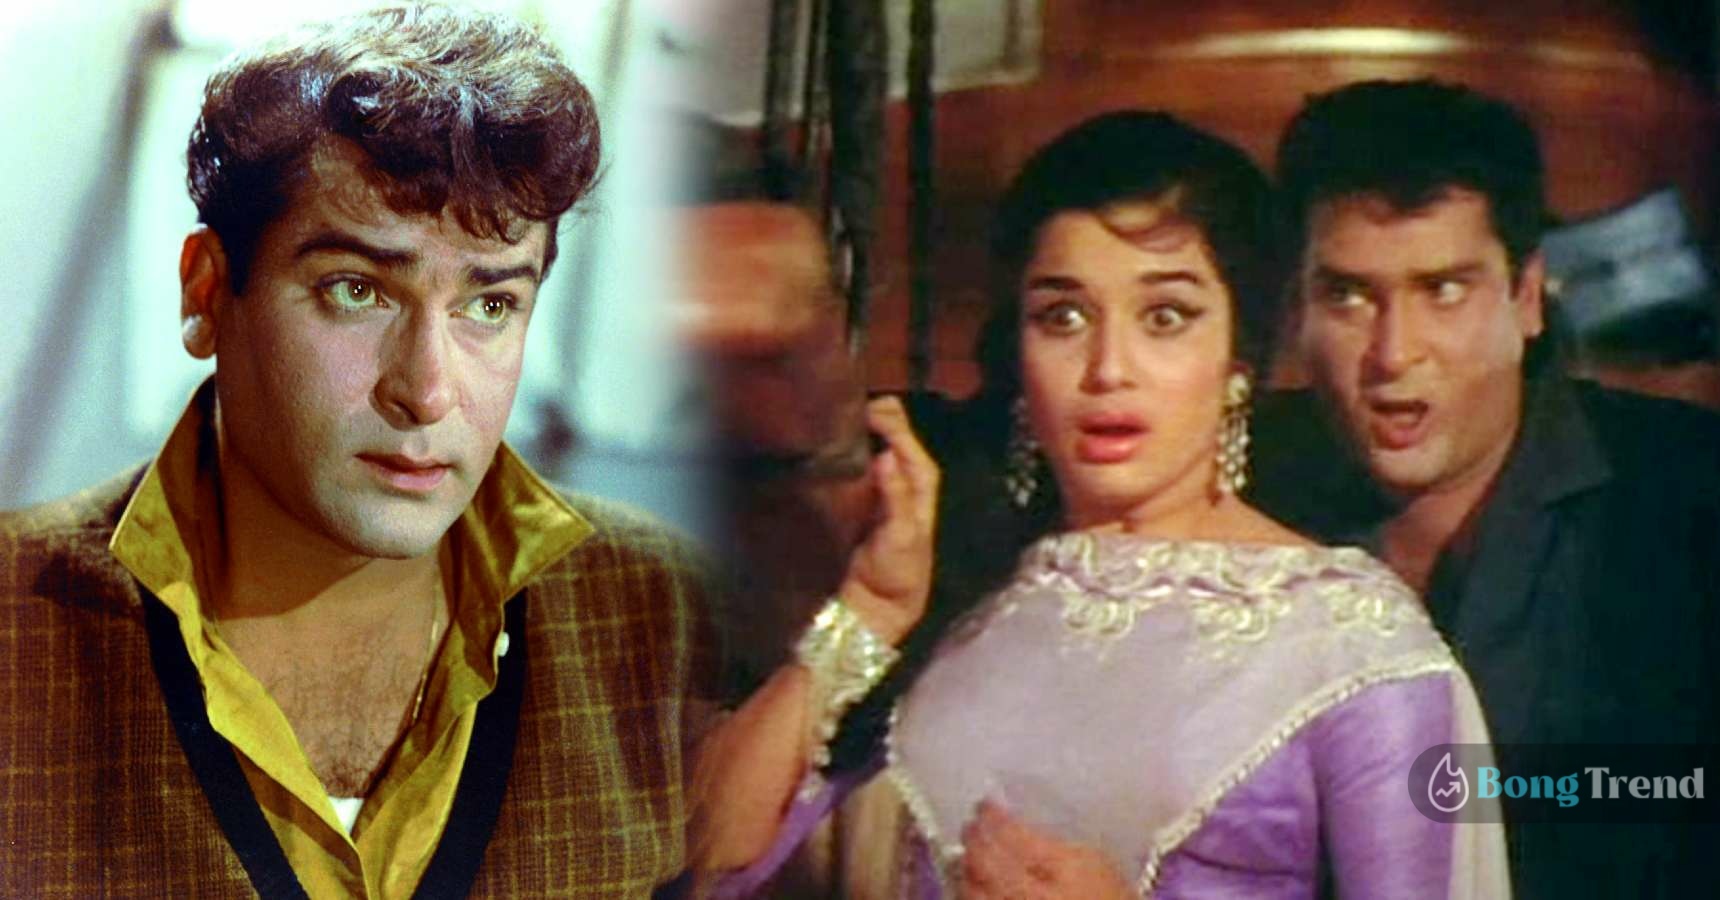 Shammi Kapoor wierd Condition of not getting pregnent reason and unknown story behind it